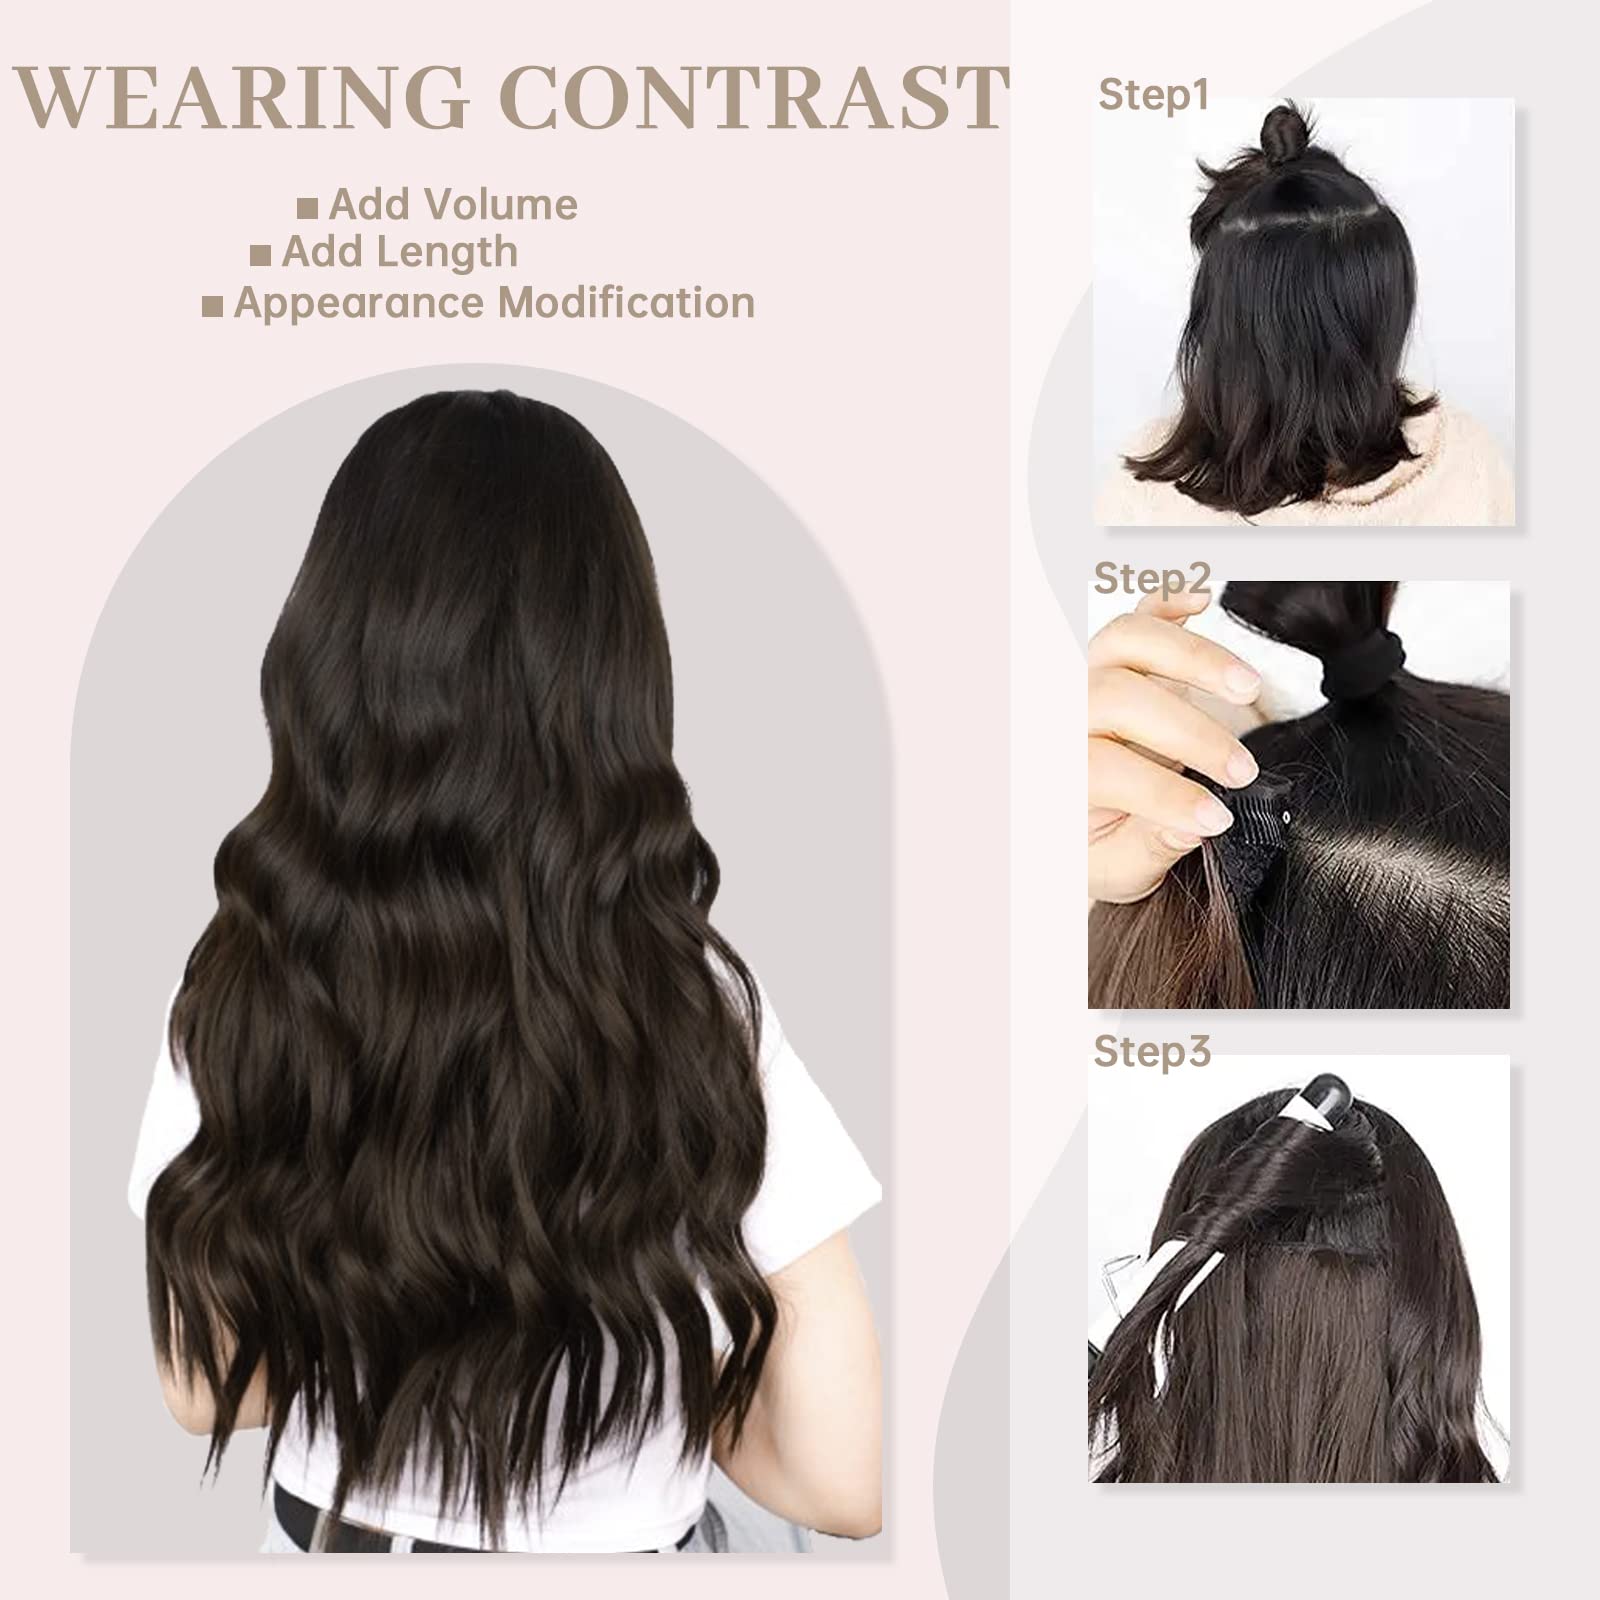 Mua Sué Exquisite 4PCS Clip in Long Soft Glam Waves Thick Hairpieces 20  inches Dark Brown Hair Extensions Synthetic Fiber Double Weft Hair for  Women Full Head trên Amazon Mỹ chính hãng